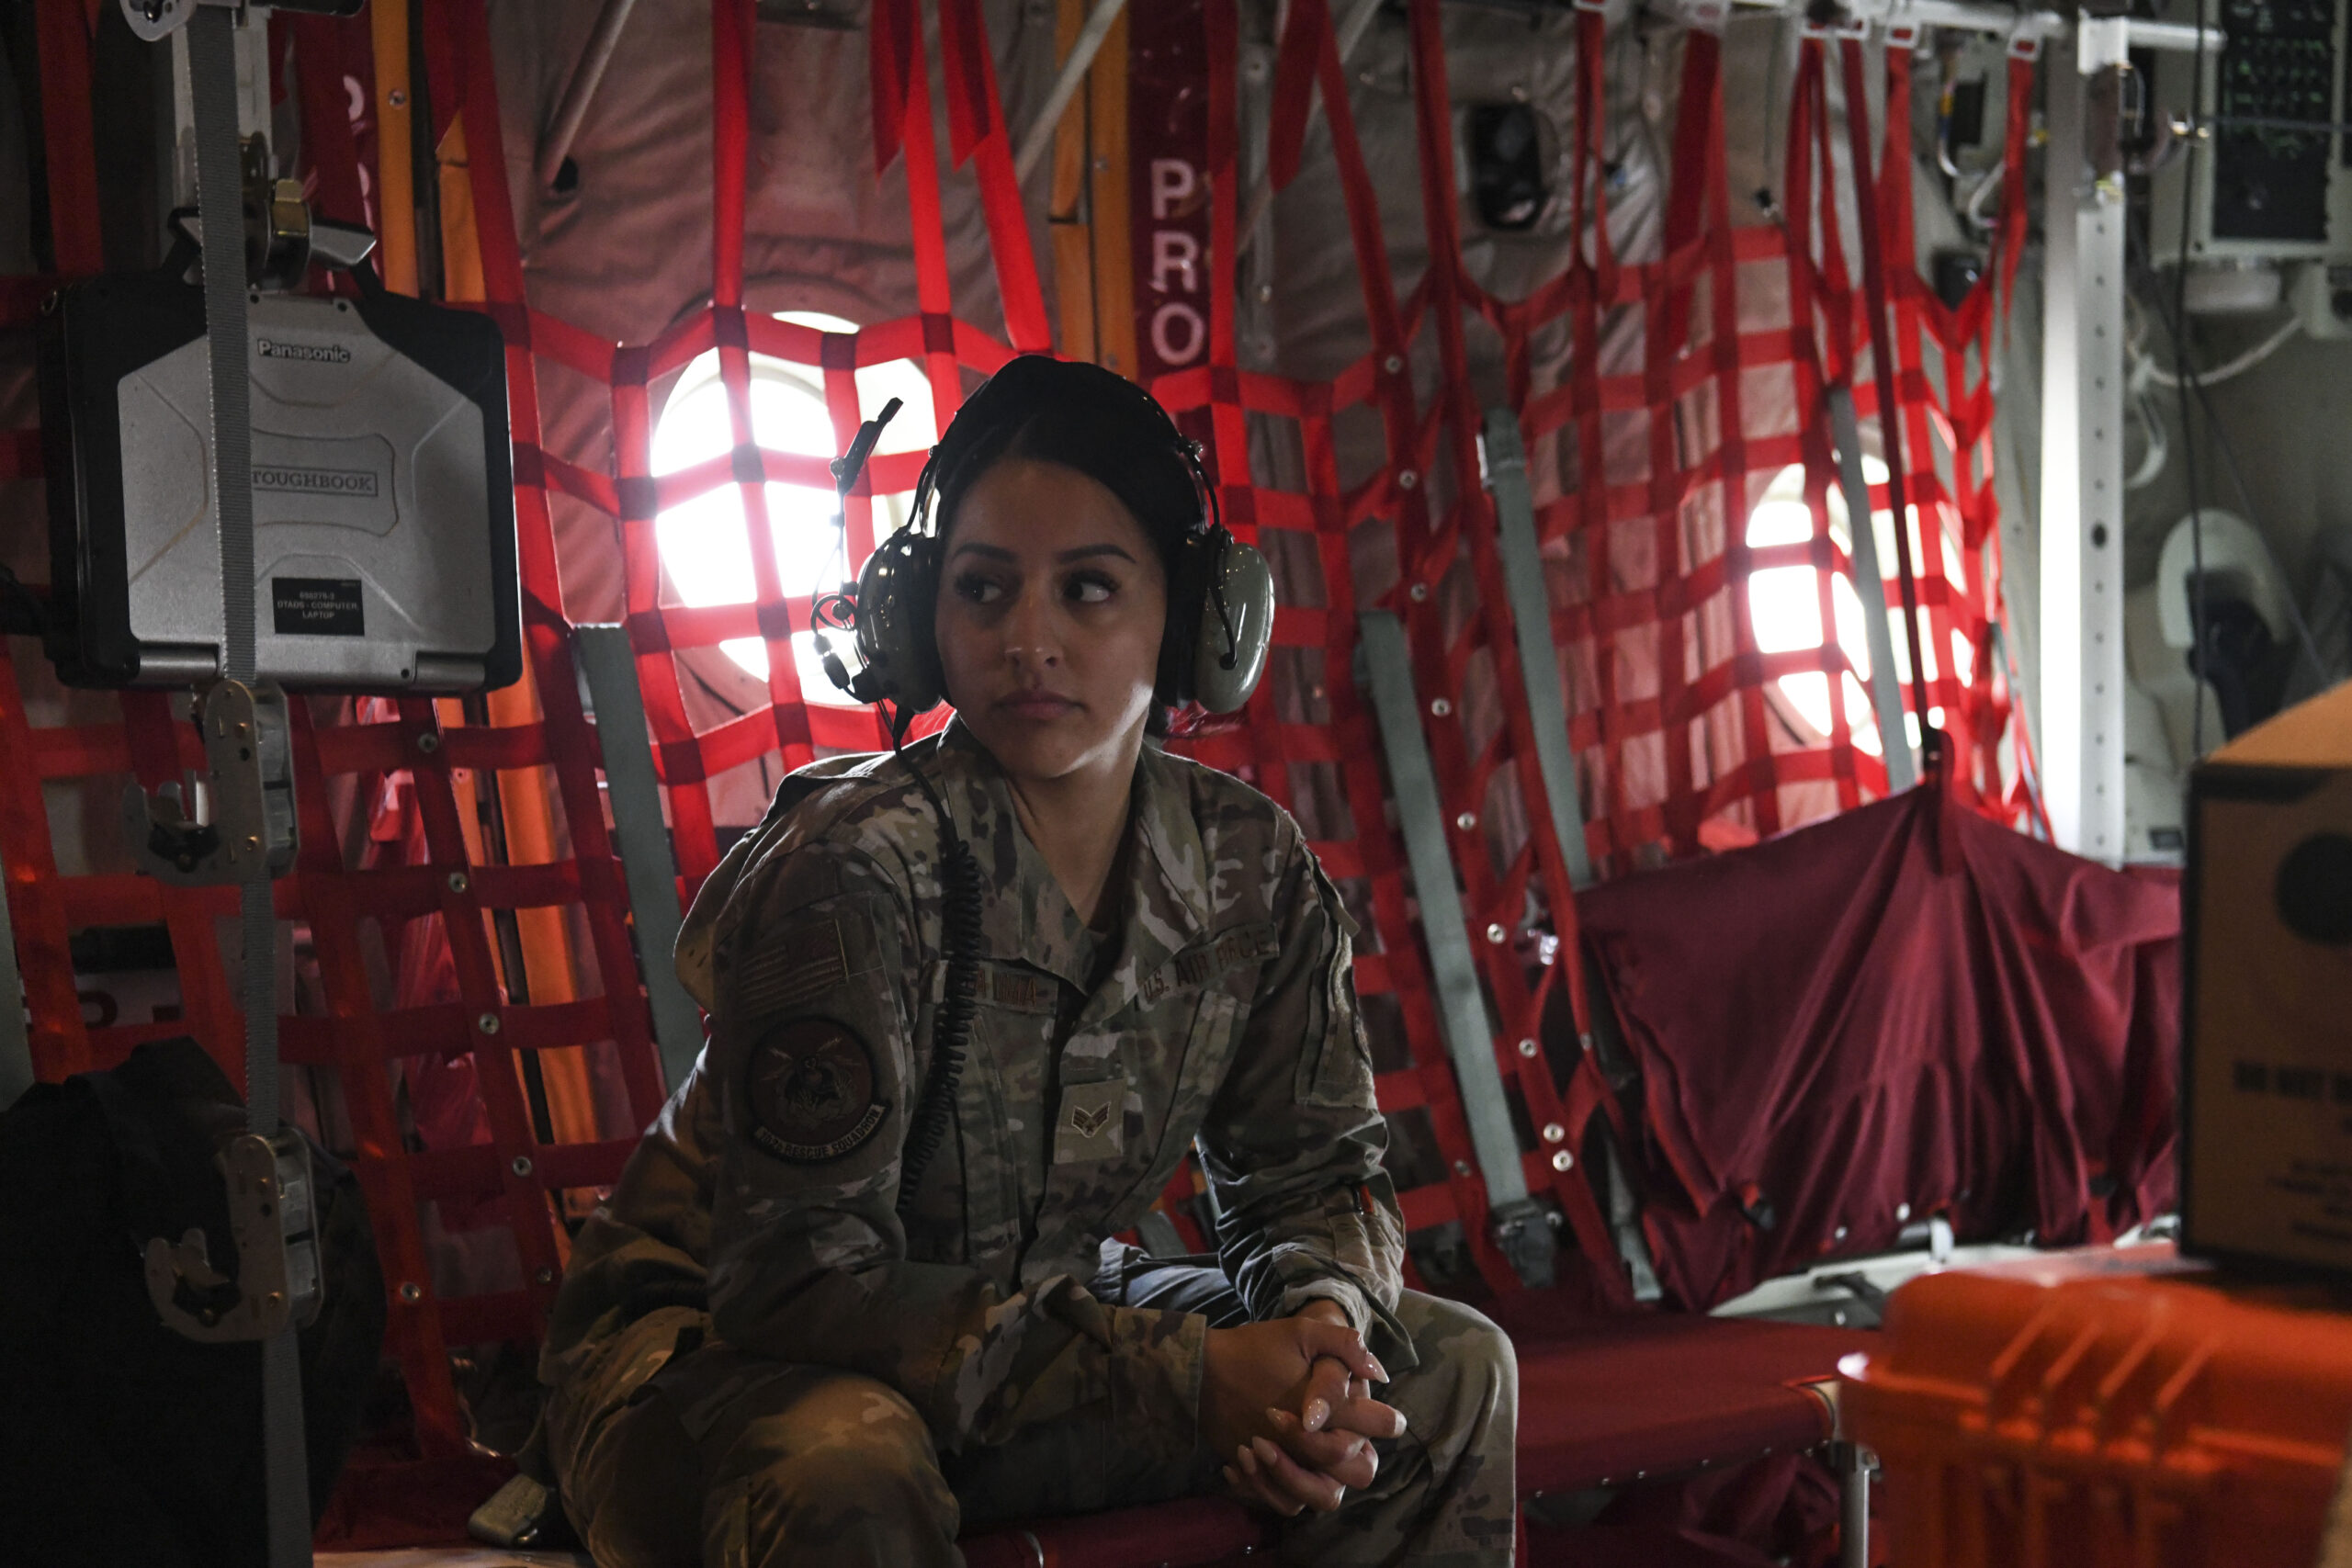 N.Y. Air National Guard 106th Rescue Wing Senior Airman Jocelyn Tapia-Puma, a 102nd Rescue Squadron aviation resource manager, looks toward the back of an HC-130J Combat King II search and rescue aircraft on Friday, May 20. Tapia-Puma was asked to join a search and rescue mission as a Spanish interpreter between members of the 102nd Rescue Squadron and passengers on-board a 32-foot vessel 1,200 miles off the coast of Long Island, who had a passenger severely burned.  U.S. AIR NATIONAL GUARD PHOTO BY SSGT. DANIEL H. FARRELL